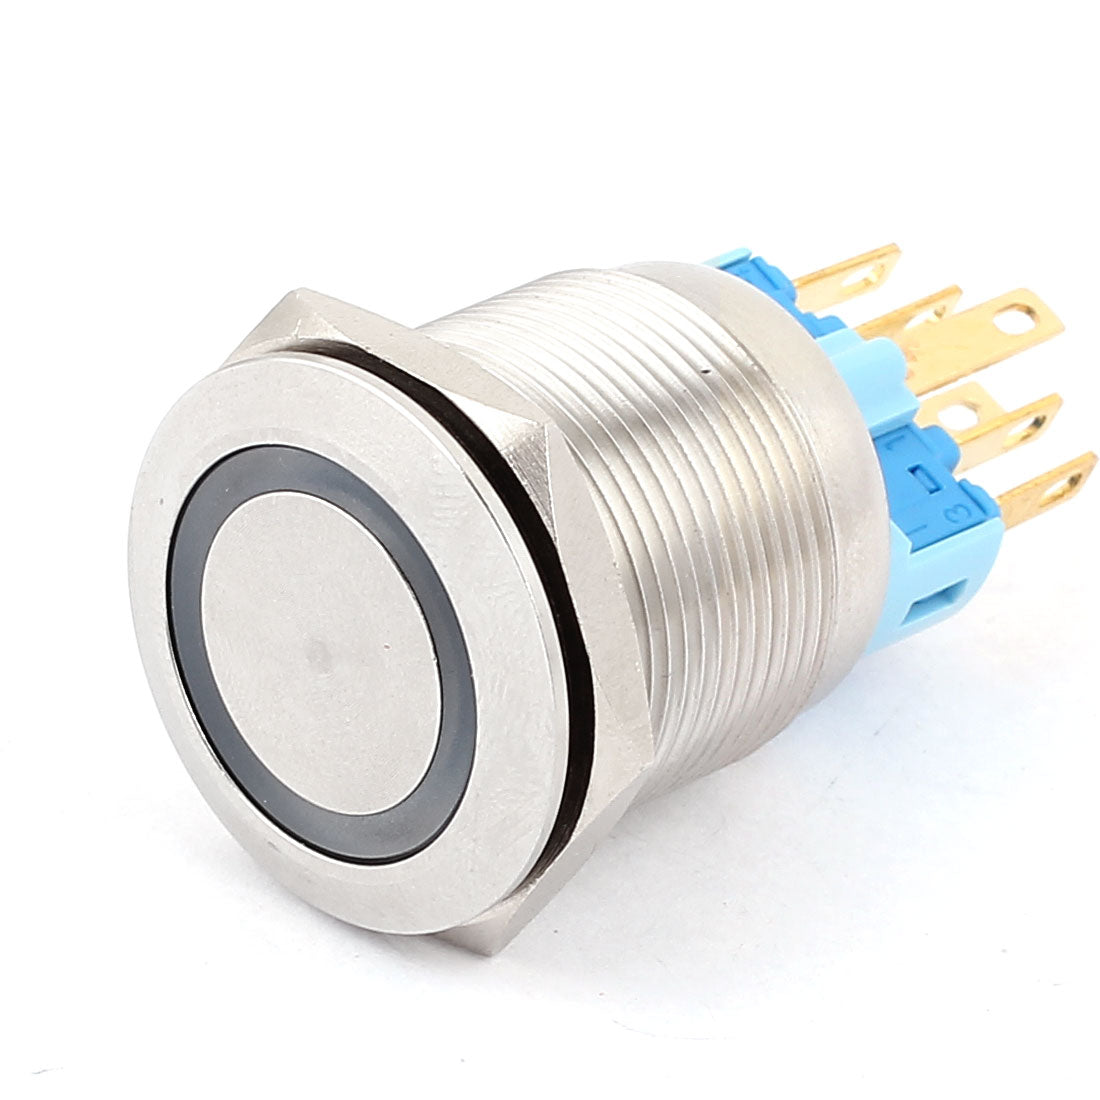 uxcell Uxcell DC 12V 18mm Blue LED Light 22mm Mounted Thread 6 Pins SPDT NO/NC Latching Push Button Switch